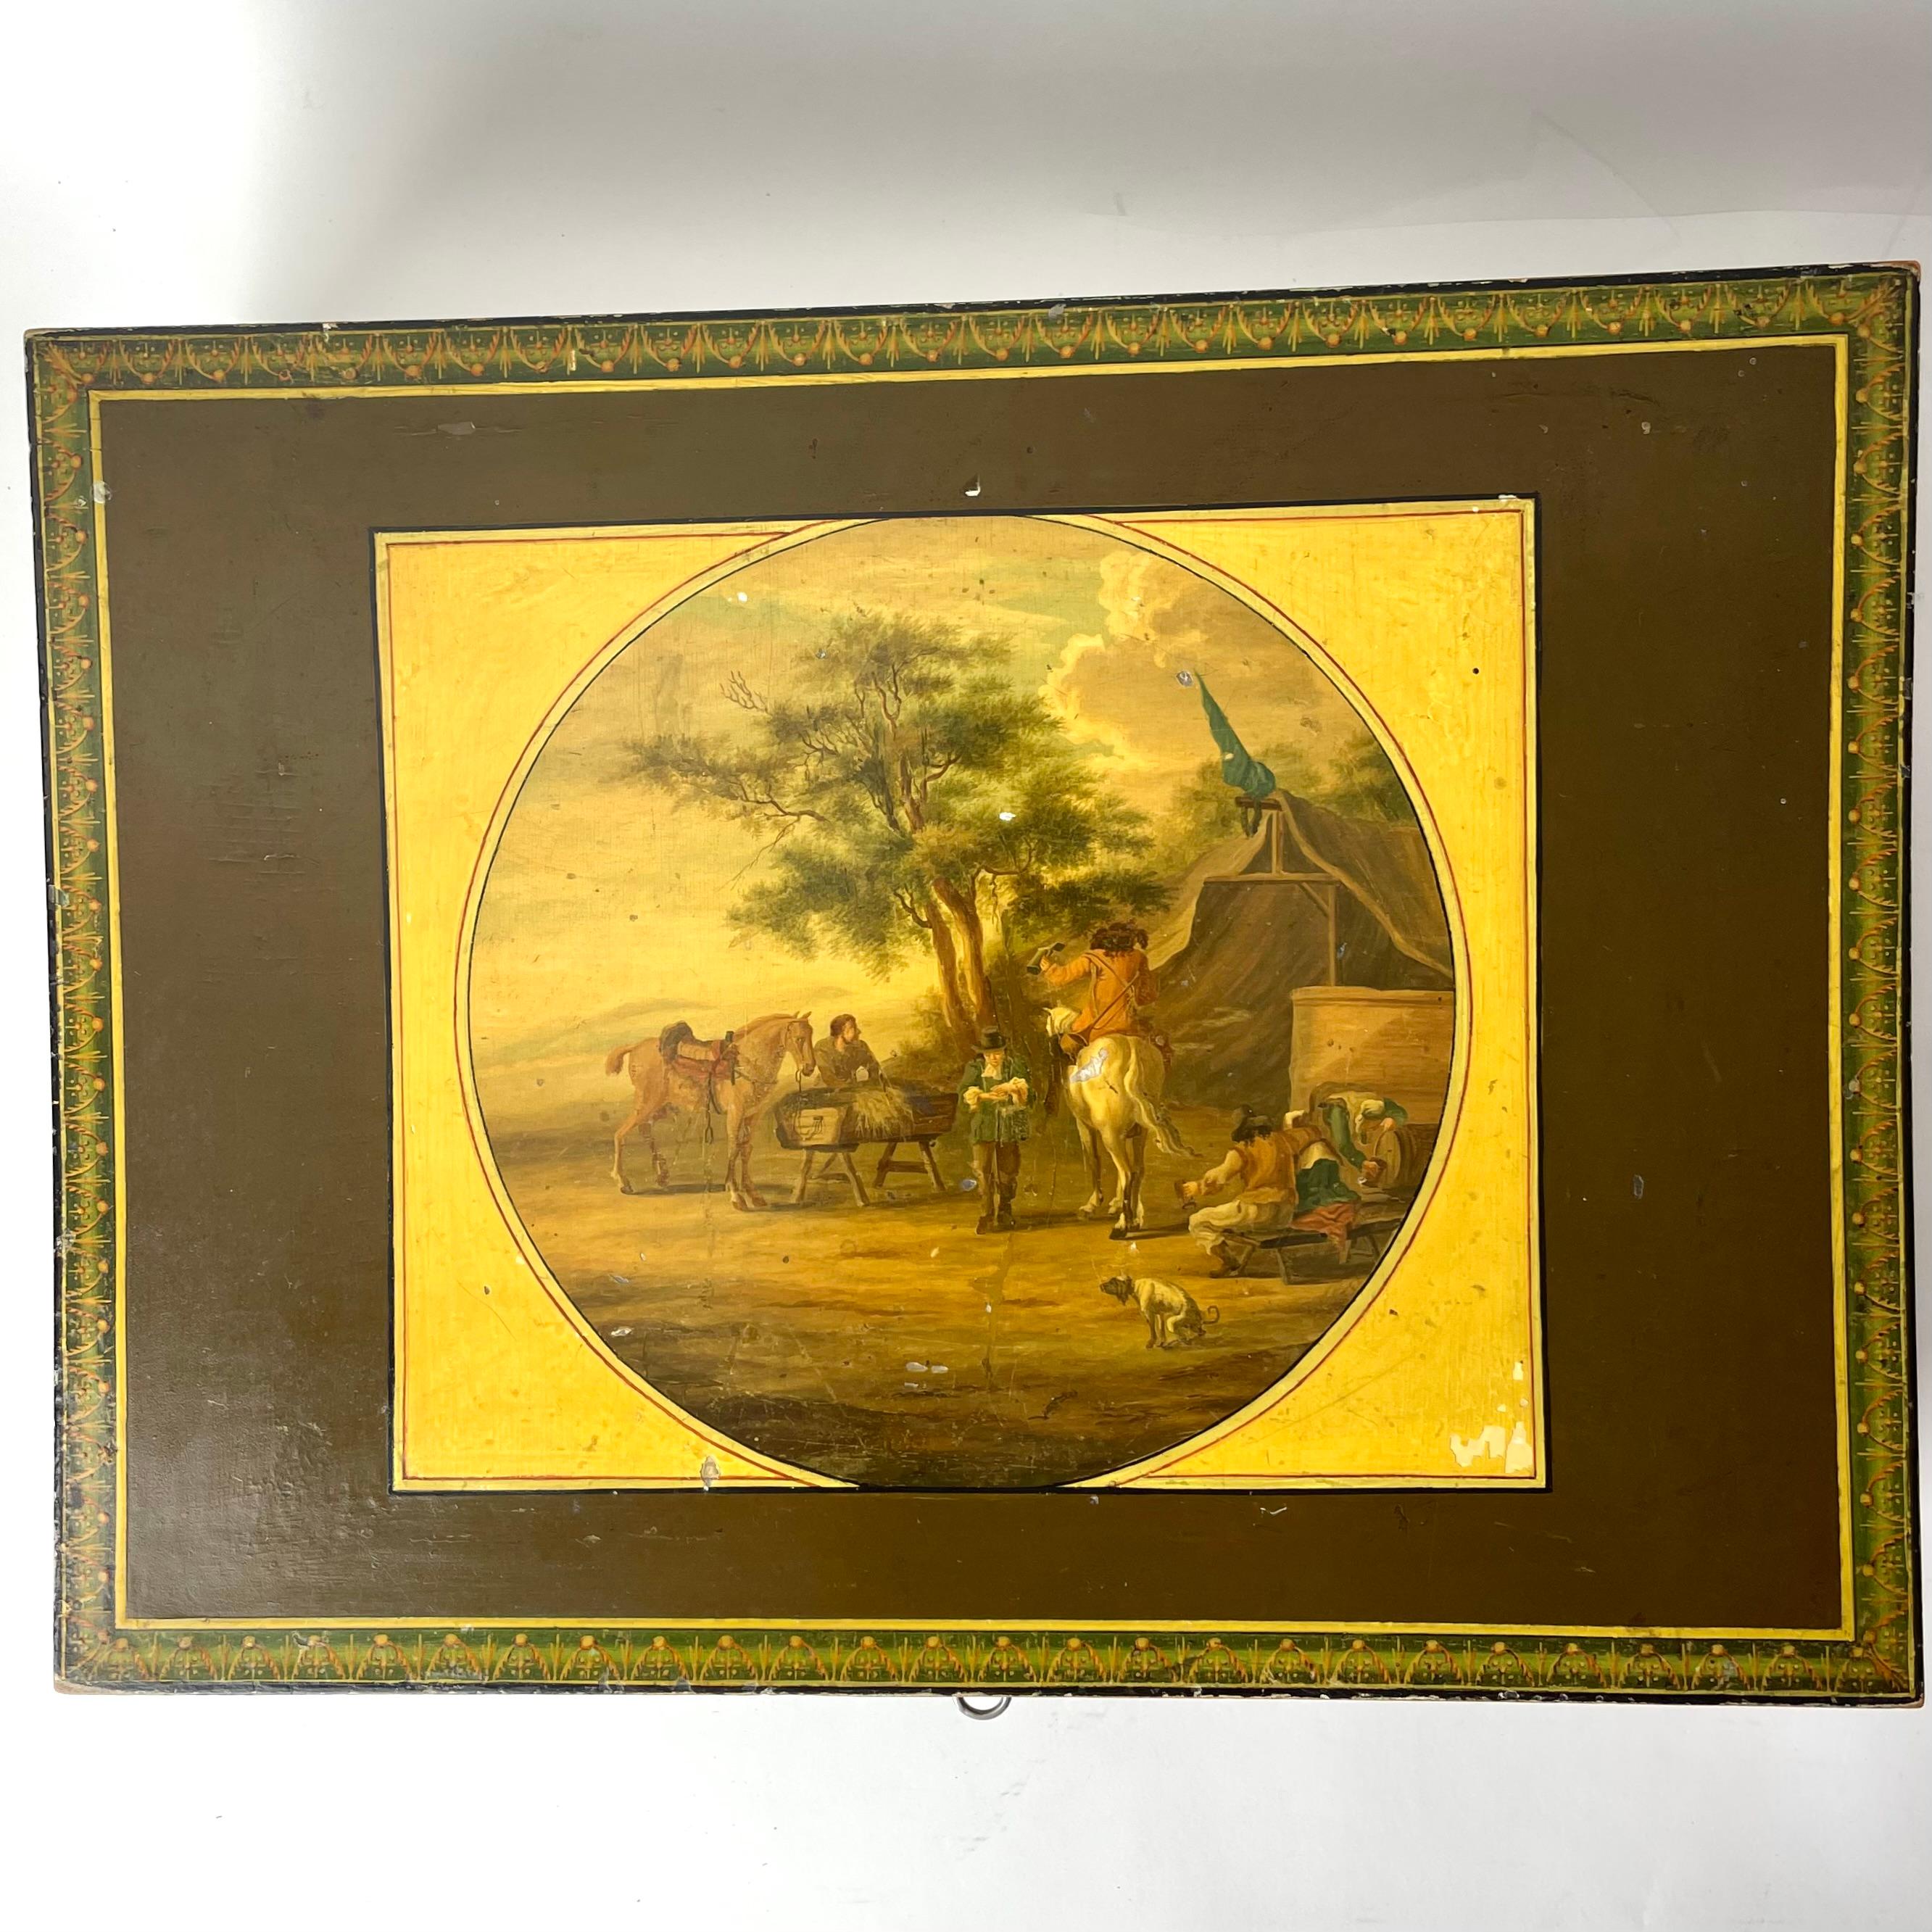 Empire Large Sewing Box Lacquer Work with Pastoral Scenes, Early 19th Century For Sale